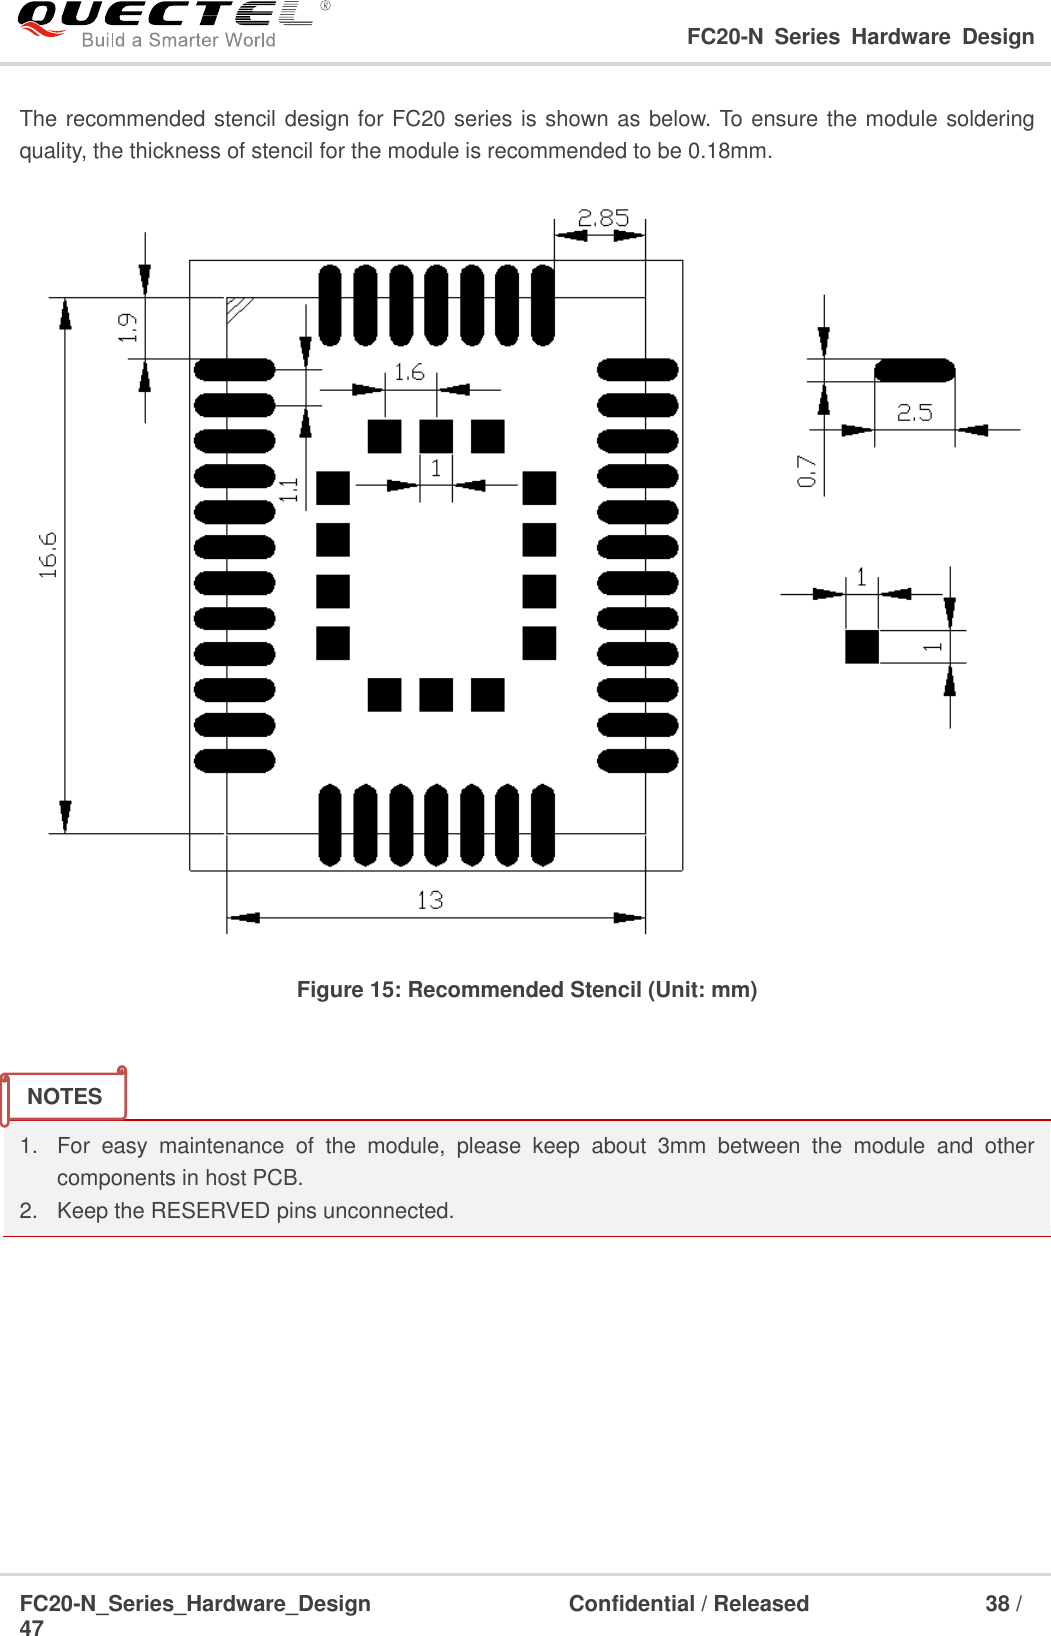                                                                                                                                     FC20-N  Series  Hardware  Design  FC20-N_Series_Hardware_Design                                Confidential / Released                    38 / 47    The recommended stencil design for FC20 series is shown as below. To ensure the module soldering quality, the thickness of stencil for the module is recommended to be 0.18mm.  Figure 15: Recommended Stencil (Unit: mm)   1. For  easy  maintenance  of  the  module,  please  keep  about  3mm  between  the  module  and  other components in host PCB. 2.  Keep the RESERVED pins unconnected.  NOTES 